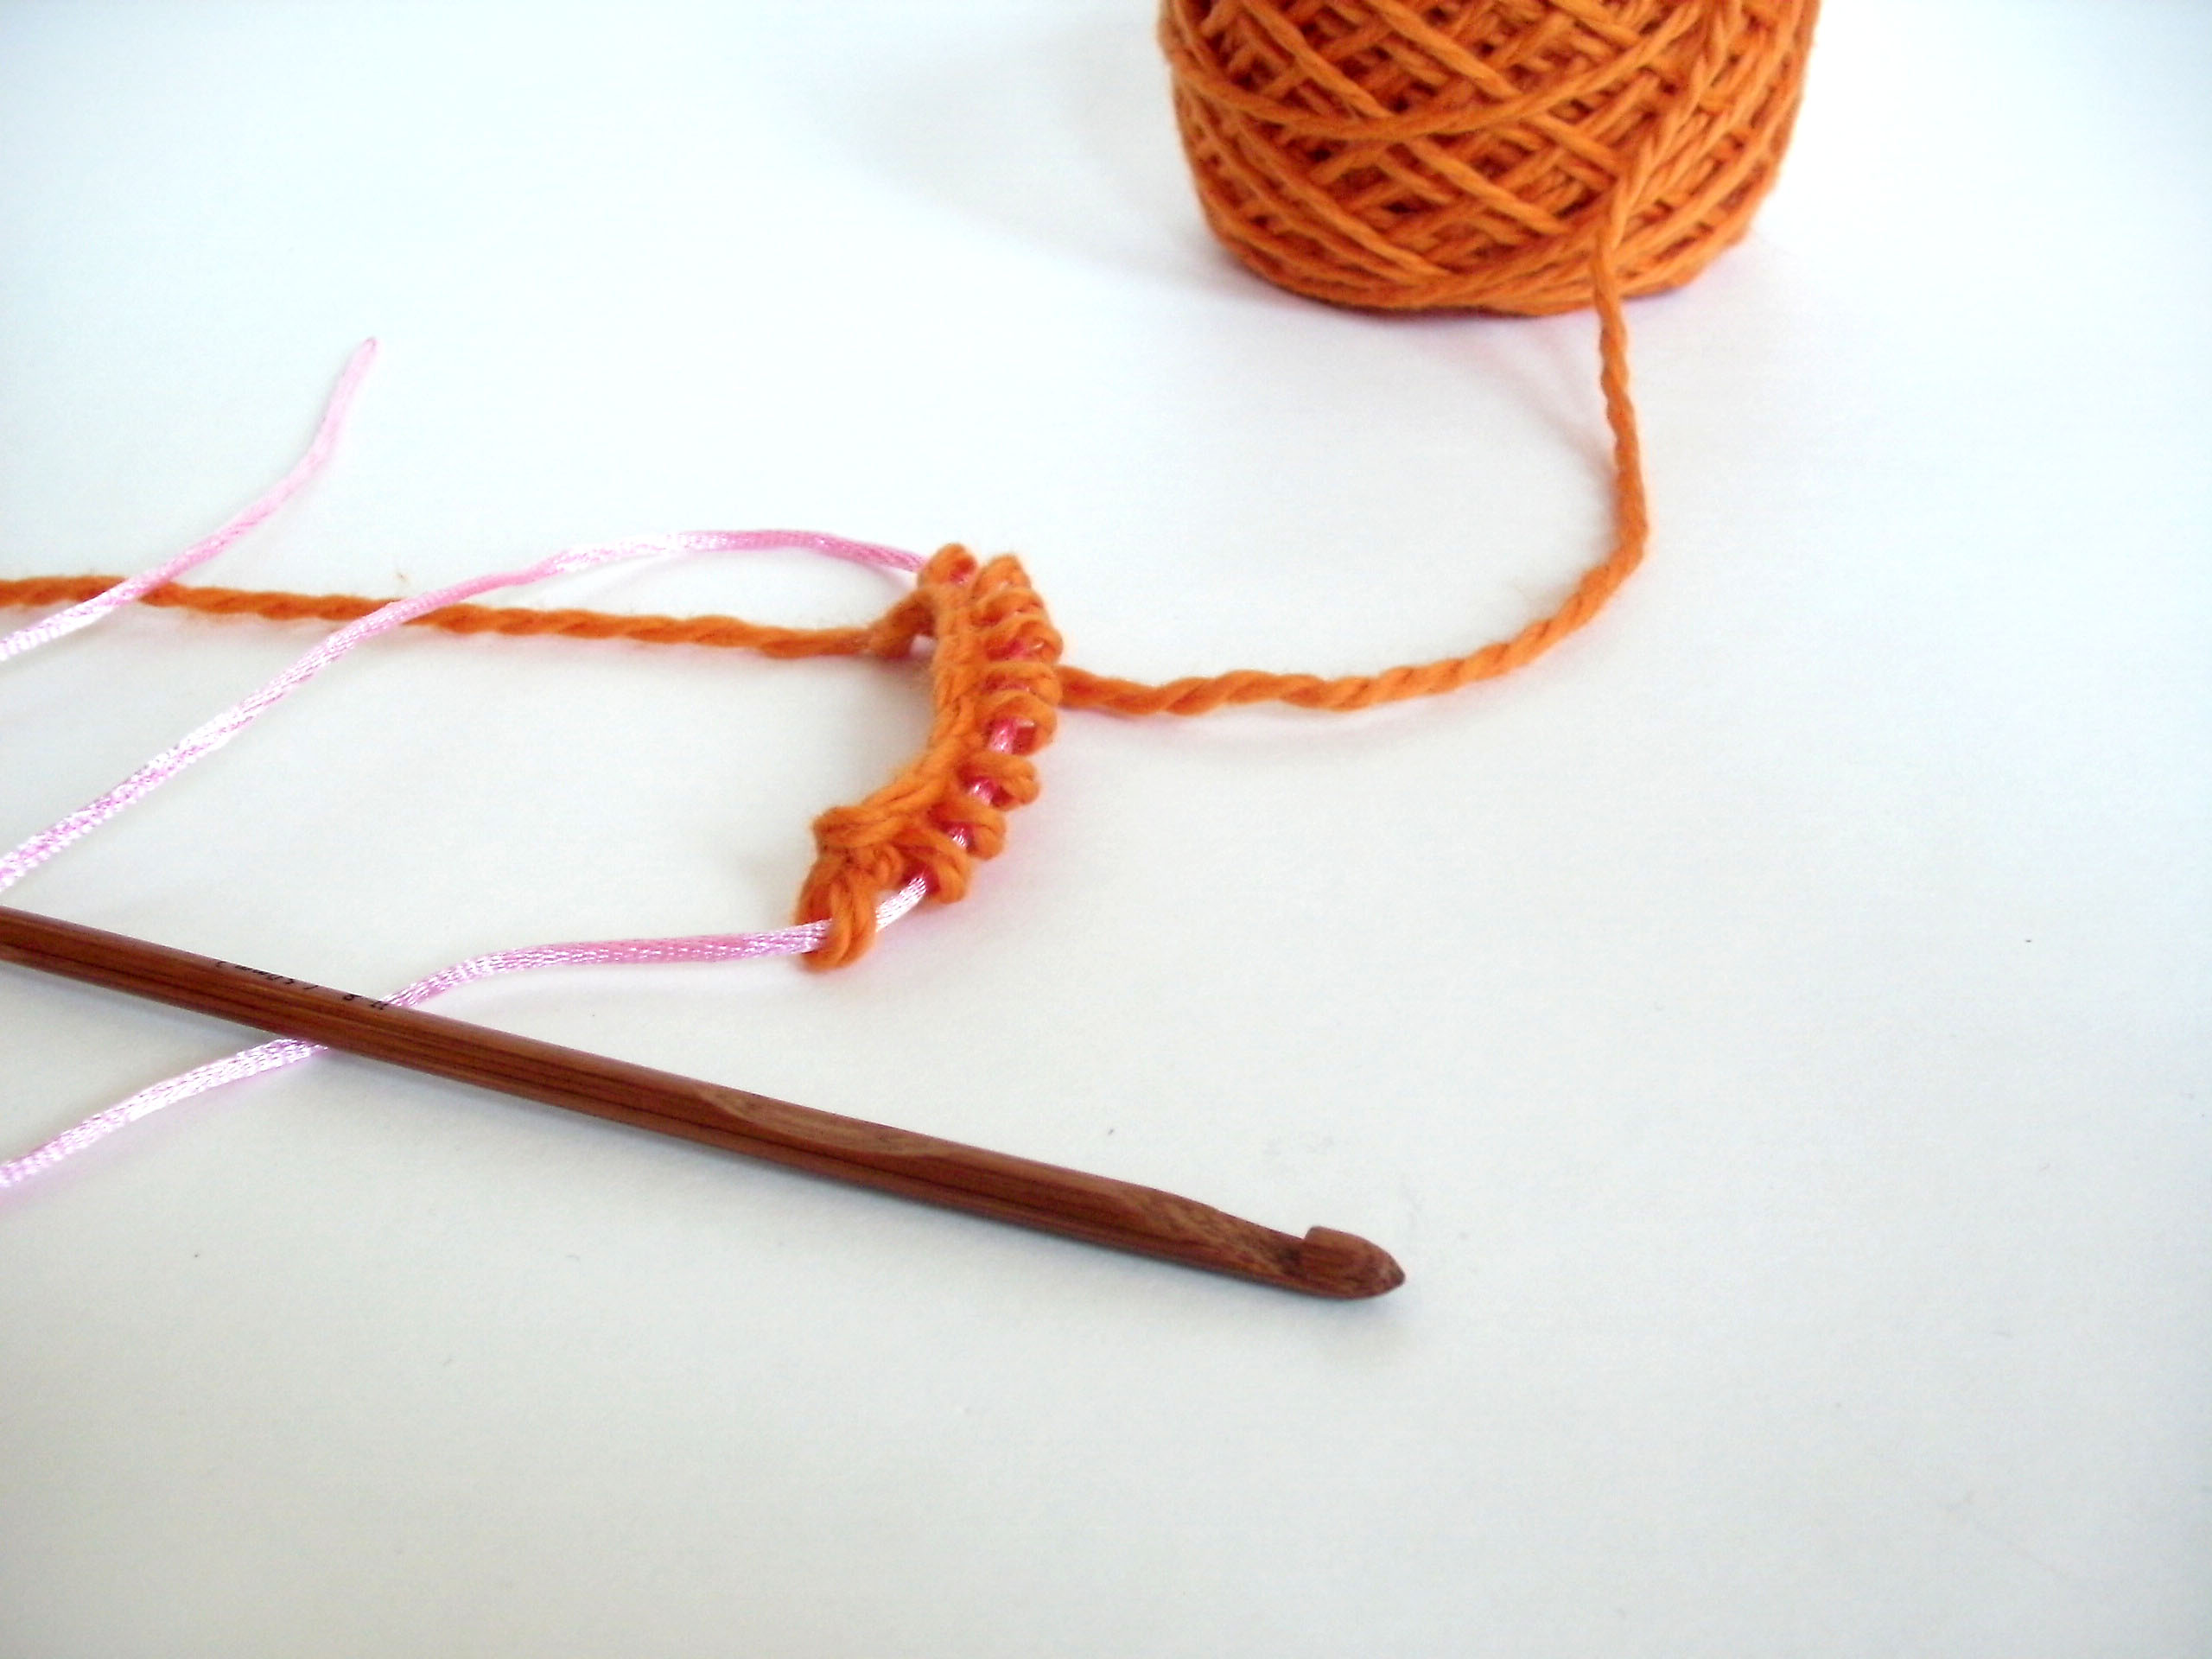 Bulk private Discharge Knook (knitting with a crochet hook): is it worth learning? - Shiny Happy  World